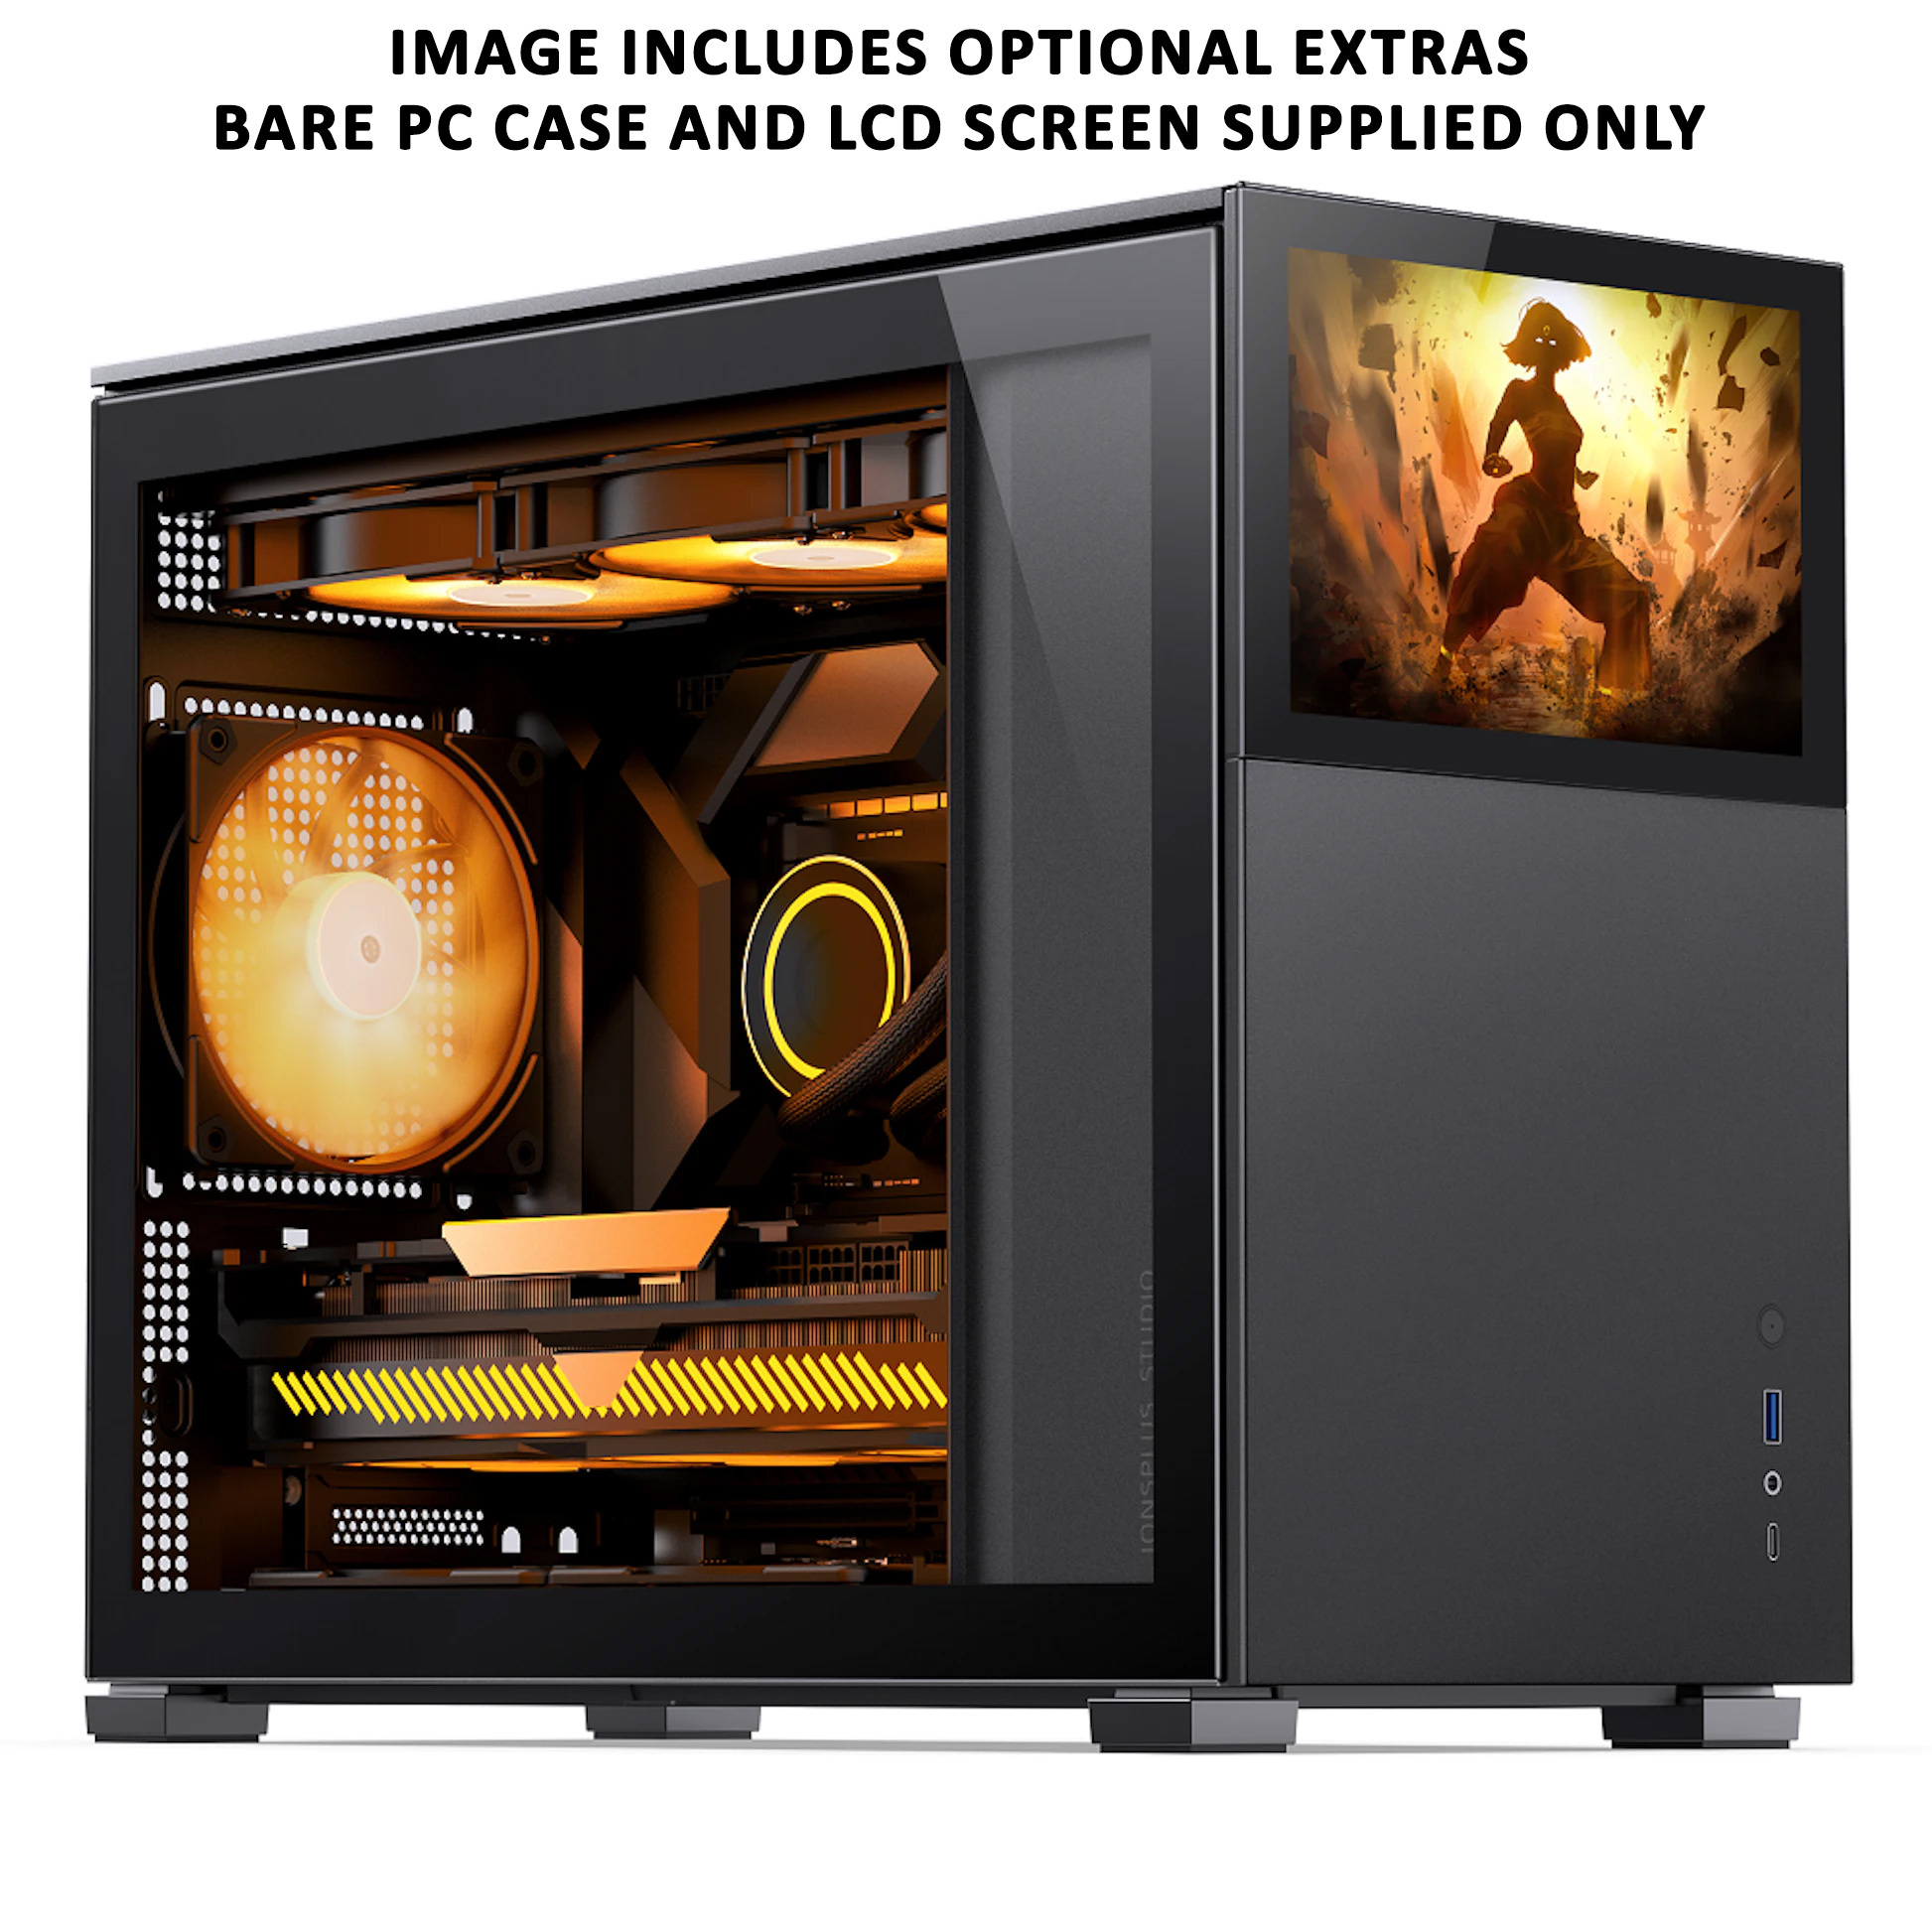 JonsBo D31 Standard With Screen Micro ATX PC Case Black, Tempered